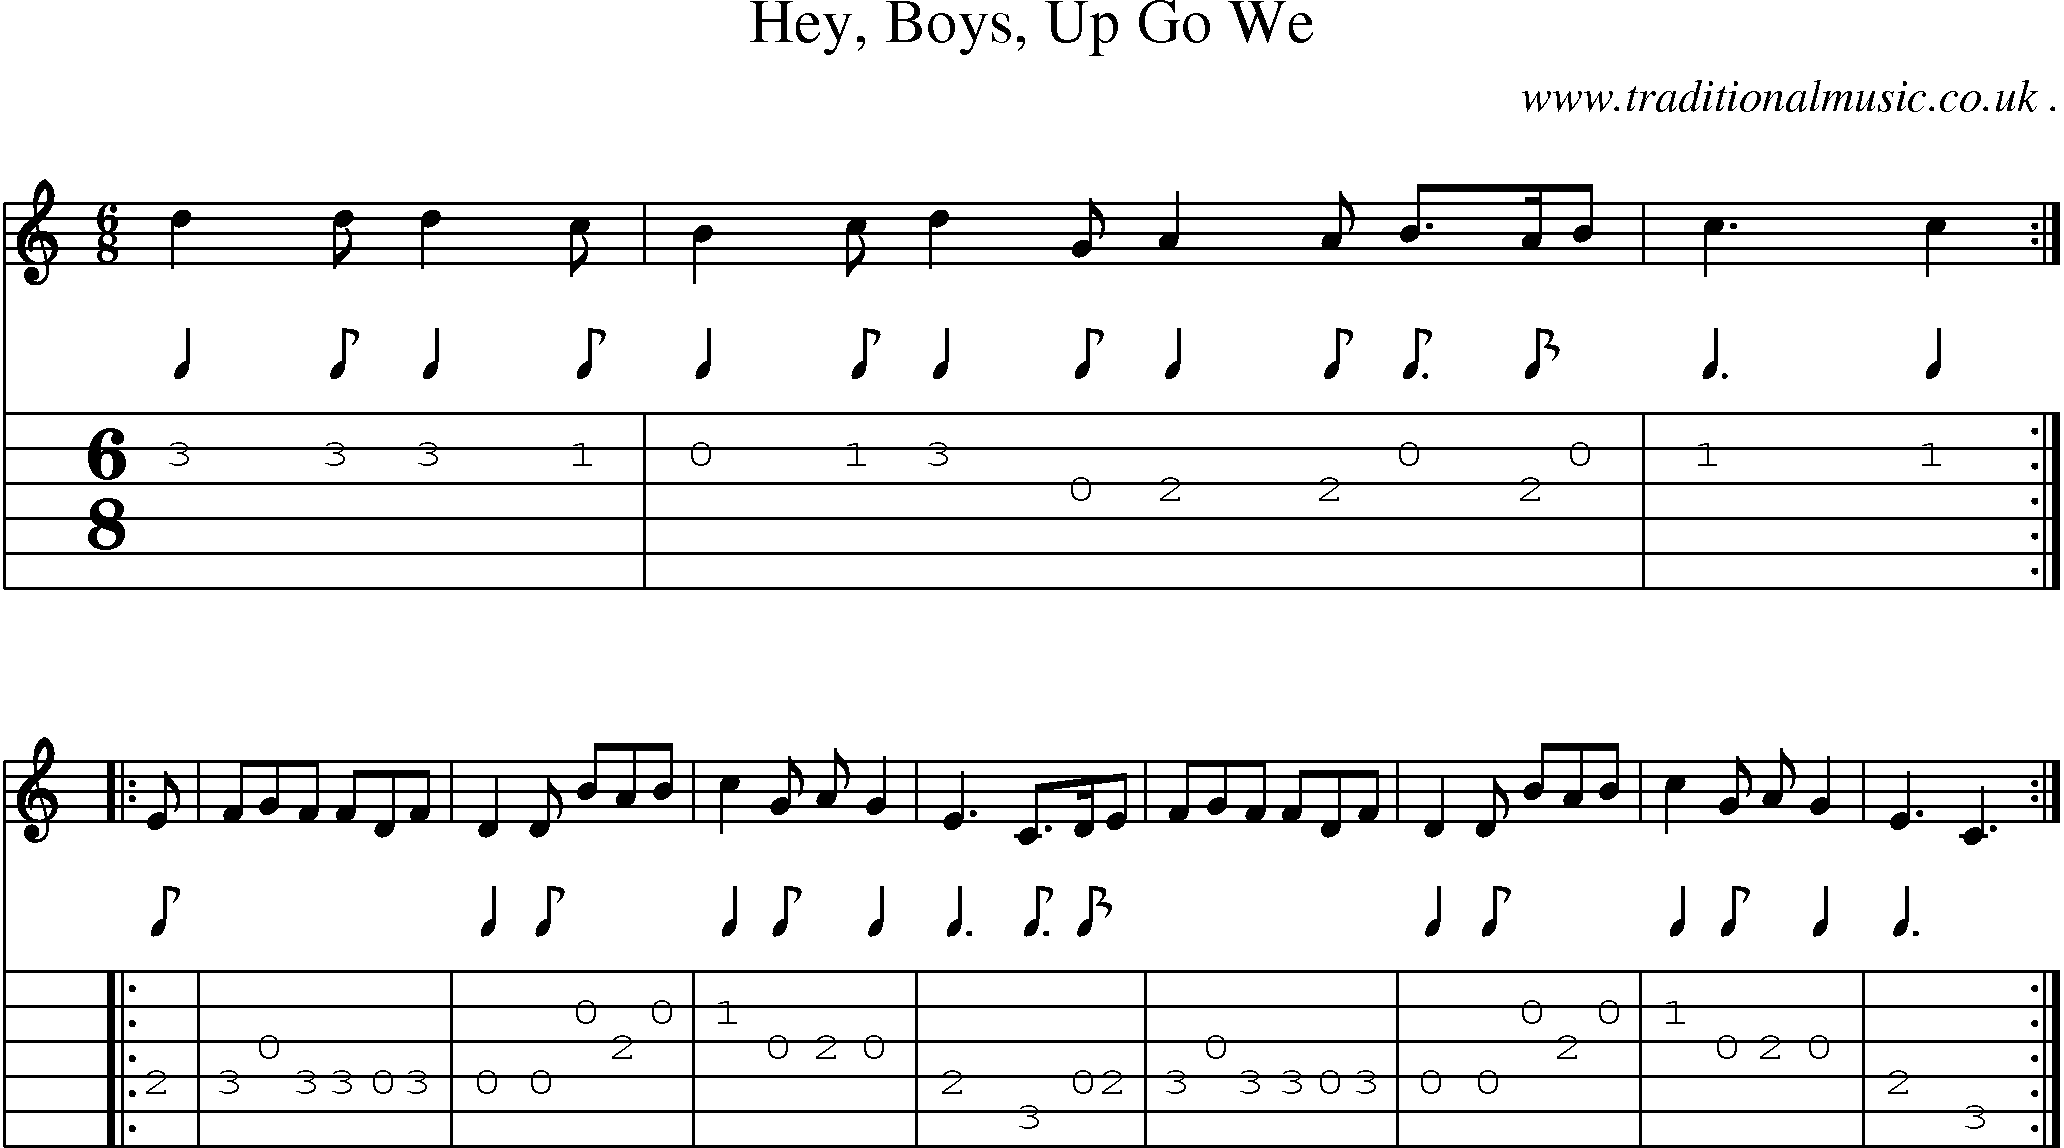 Sheet-Music and Guitar Tabs for Hey Boys Up Go We1